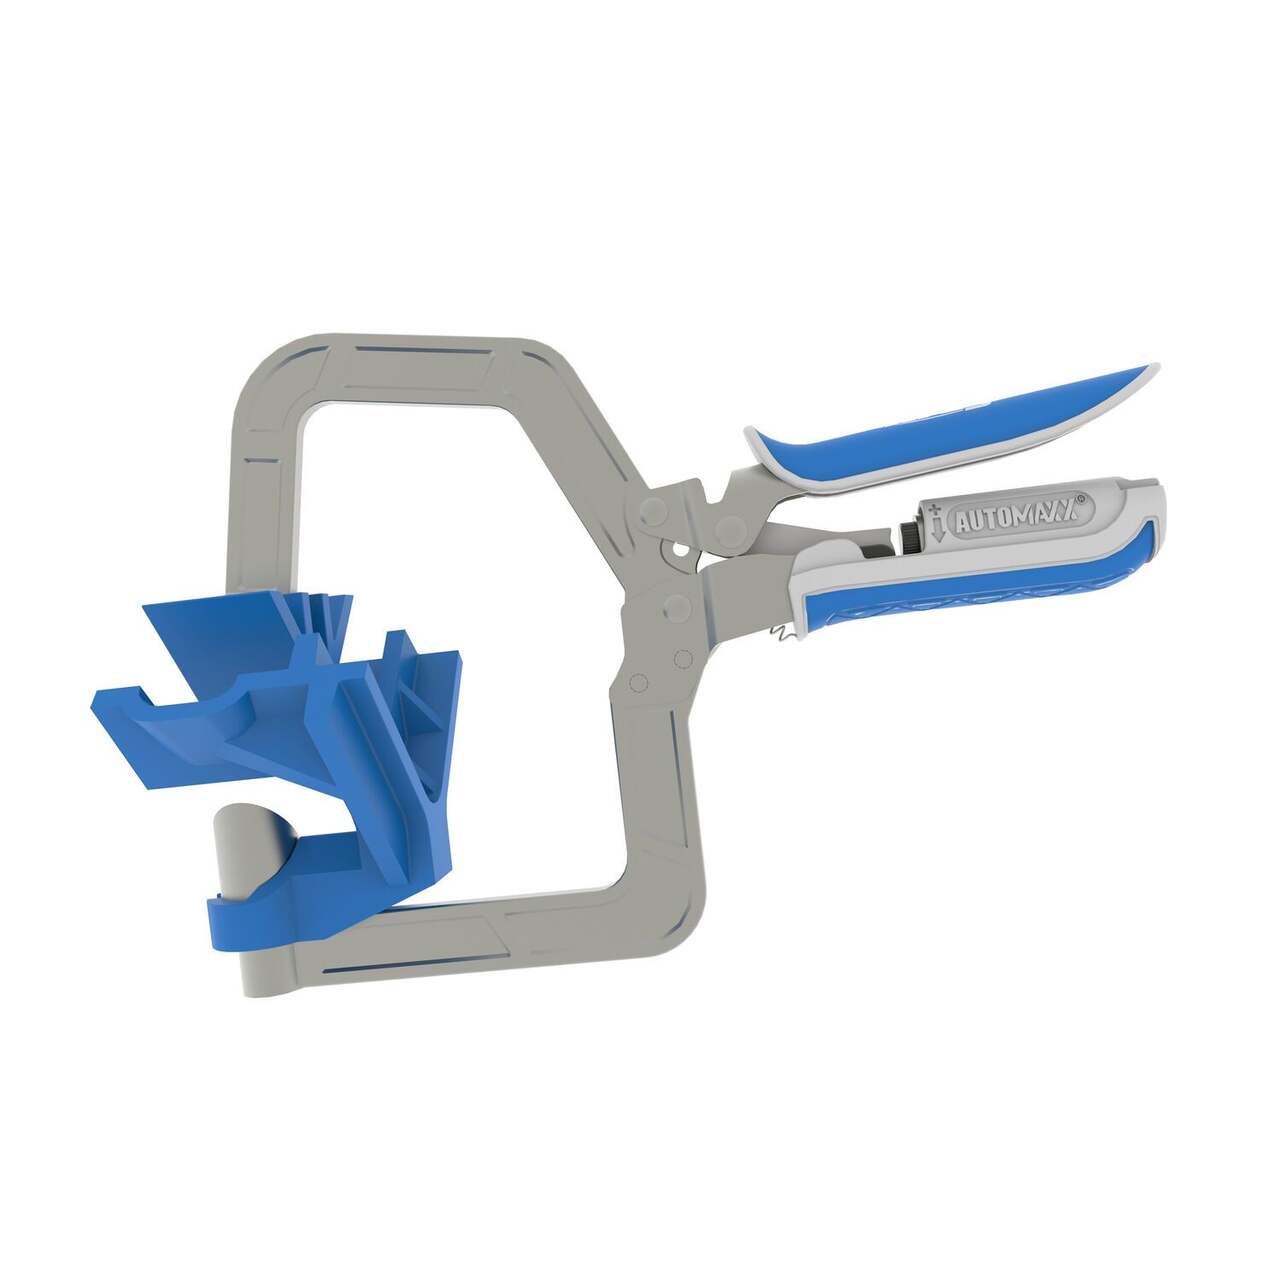 https://media-www.canadiantire.ca/product/fixing/tools/metal-working/0581875/kreg-90a-corner-clamp-5ccee53e-32c2-4d8a-b5fc-bd069cda4982-jpgrendition.jpg?imdensity=1&imwidth=640&impolicy=mZoom